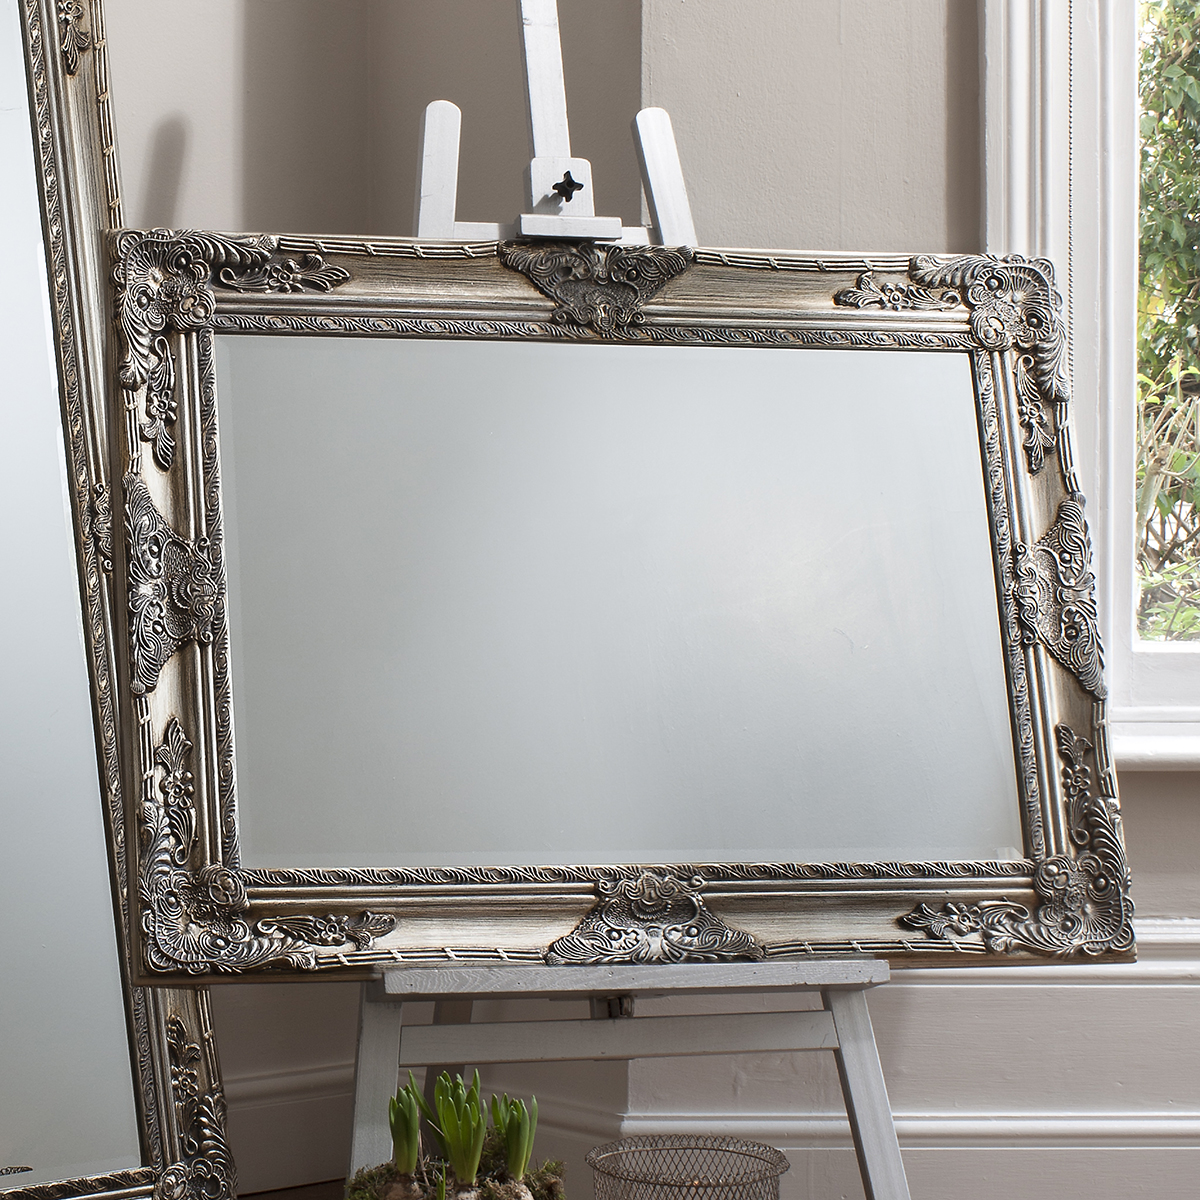 Gallery Direct Hampshire Rectangle Mirror Ant Silver | Shackletons